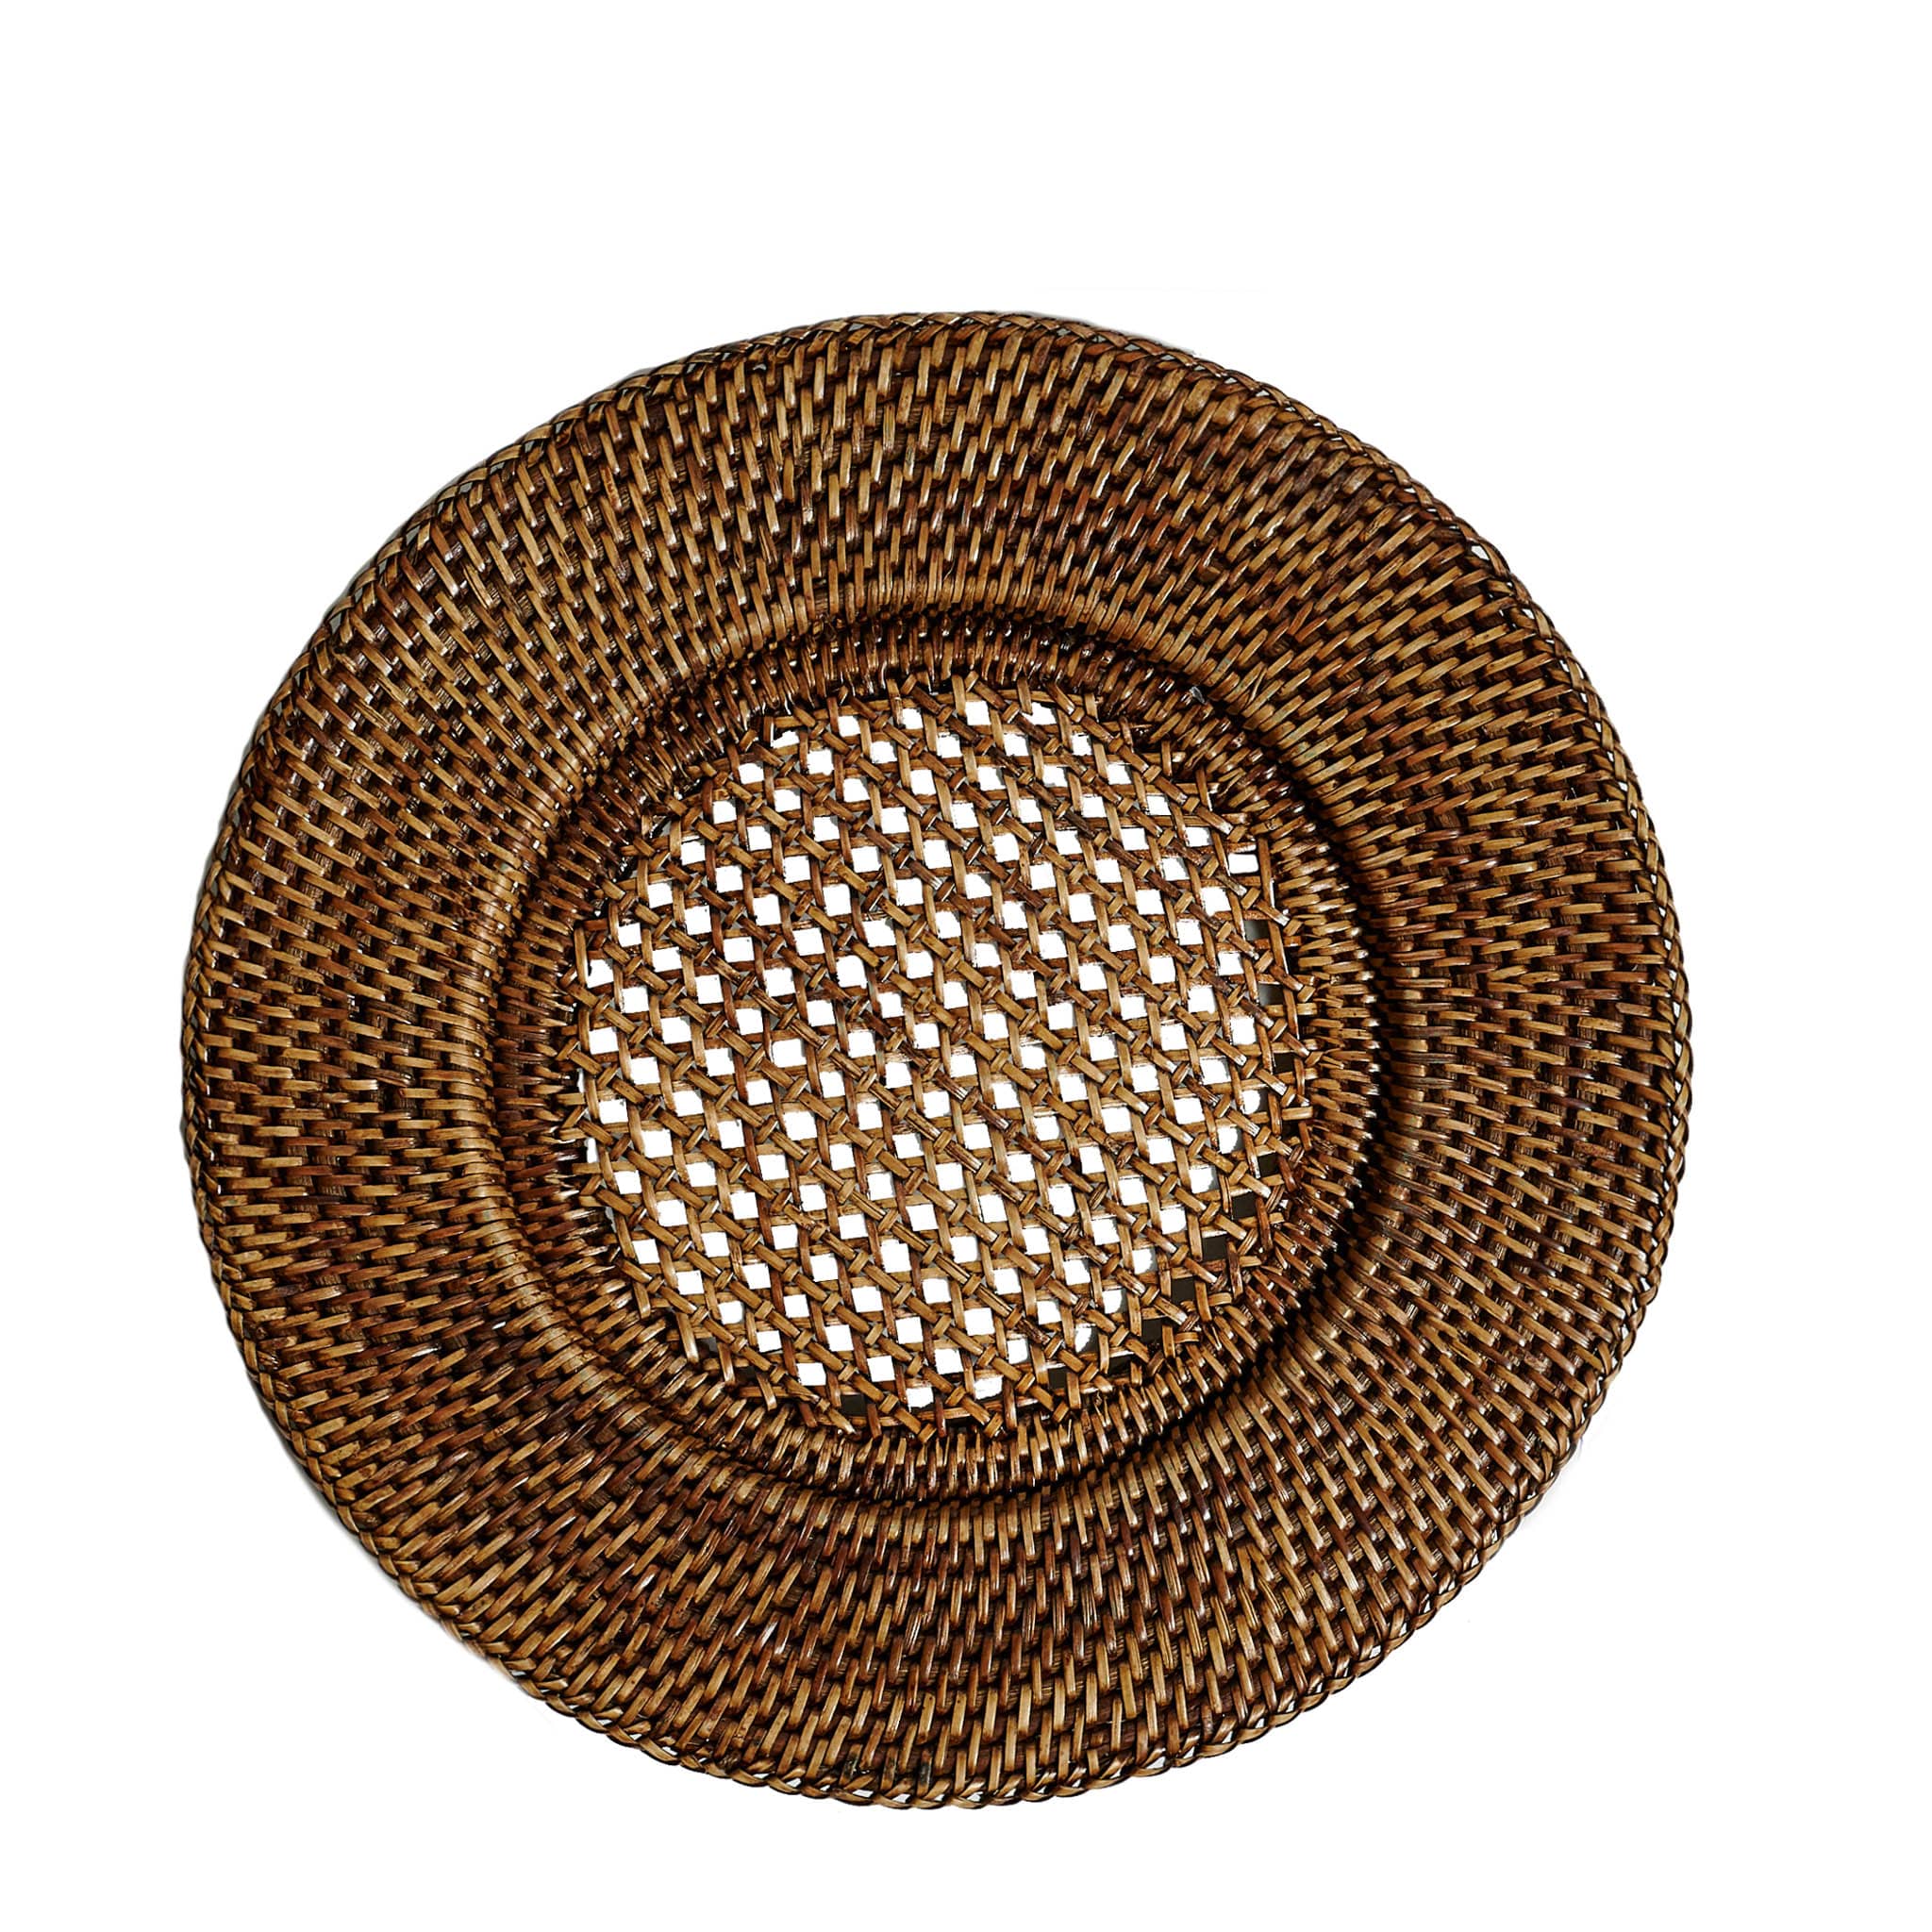 Subplate Village in natural rattan, 35 cm